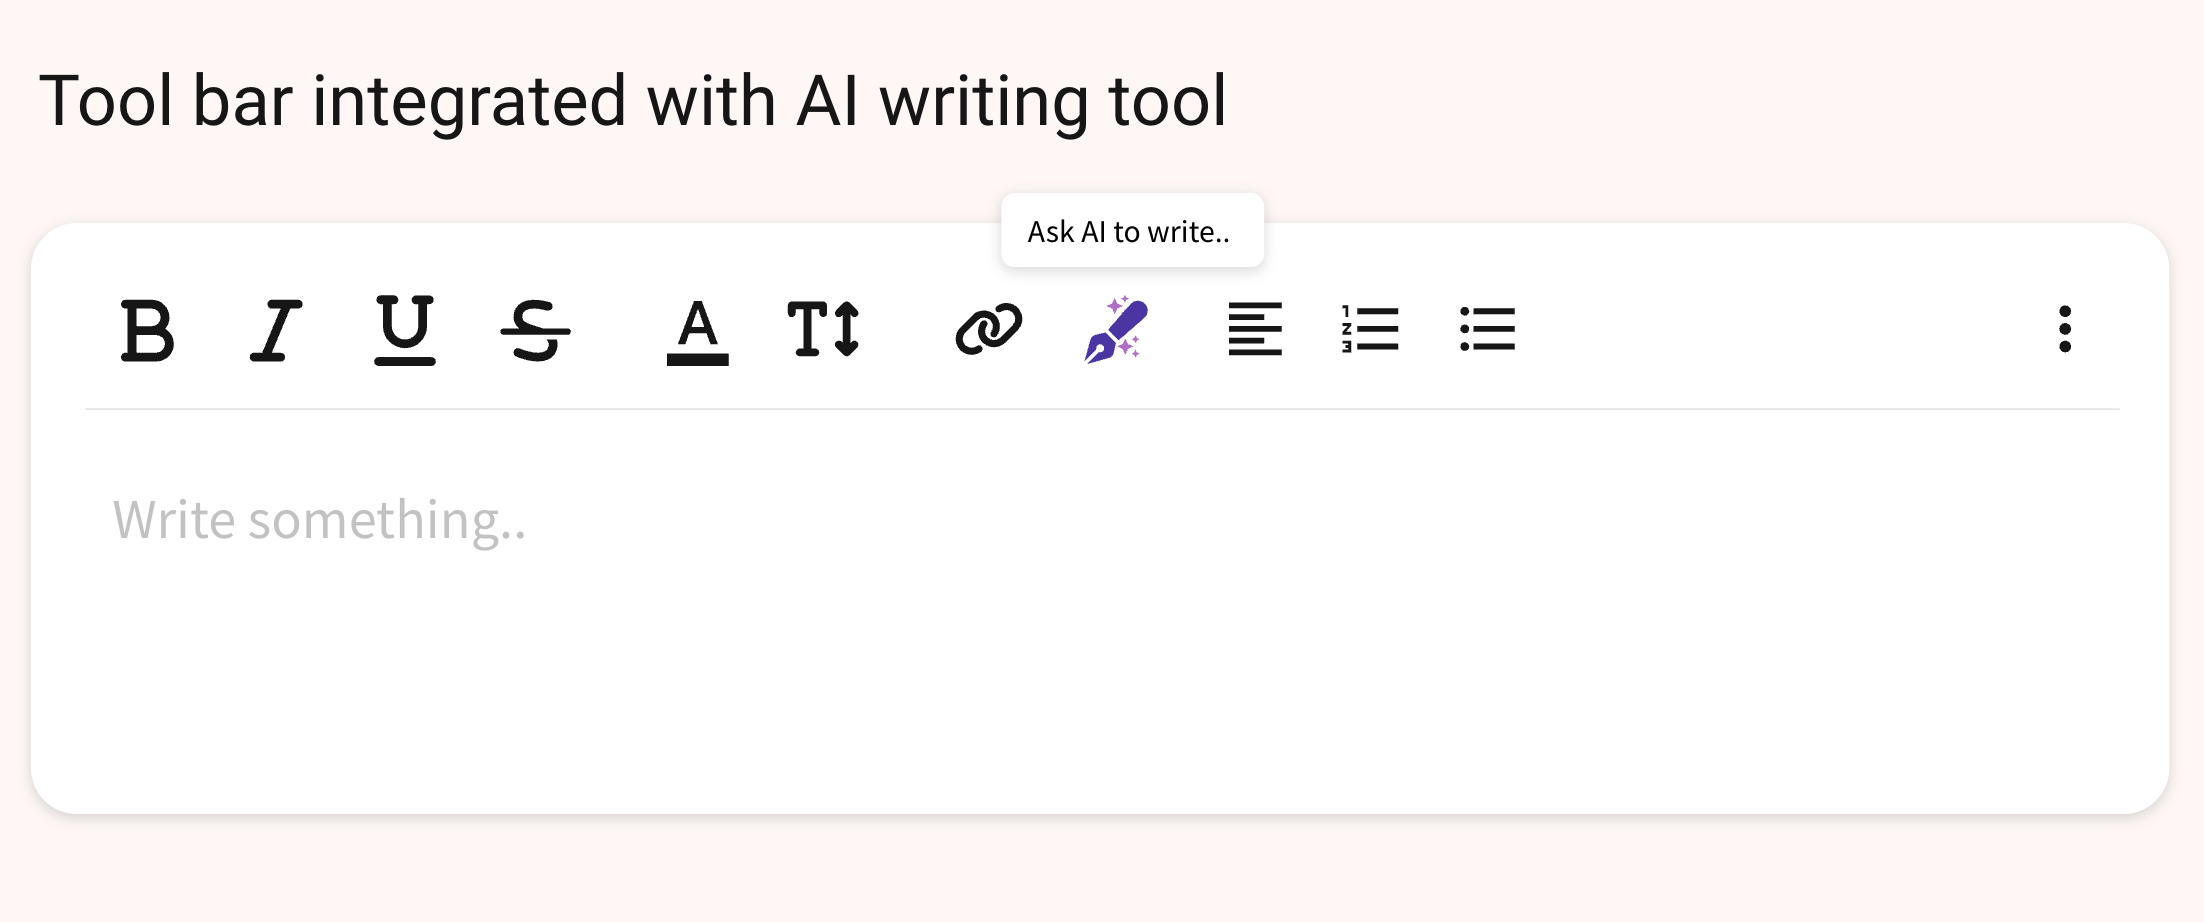 Tool bar with AI writing assistant